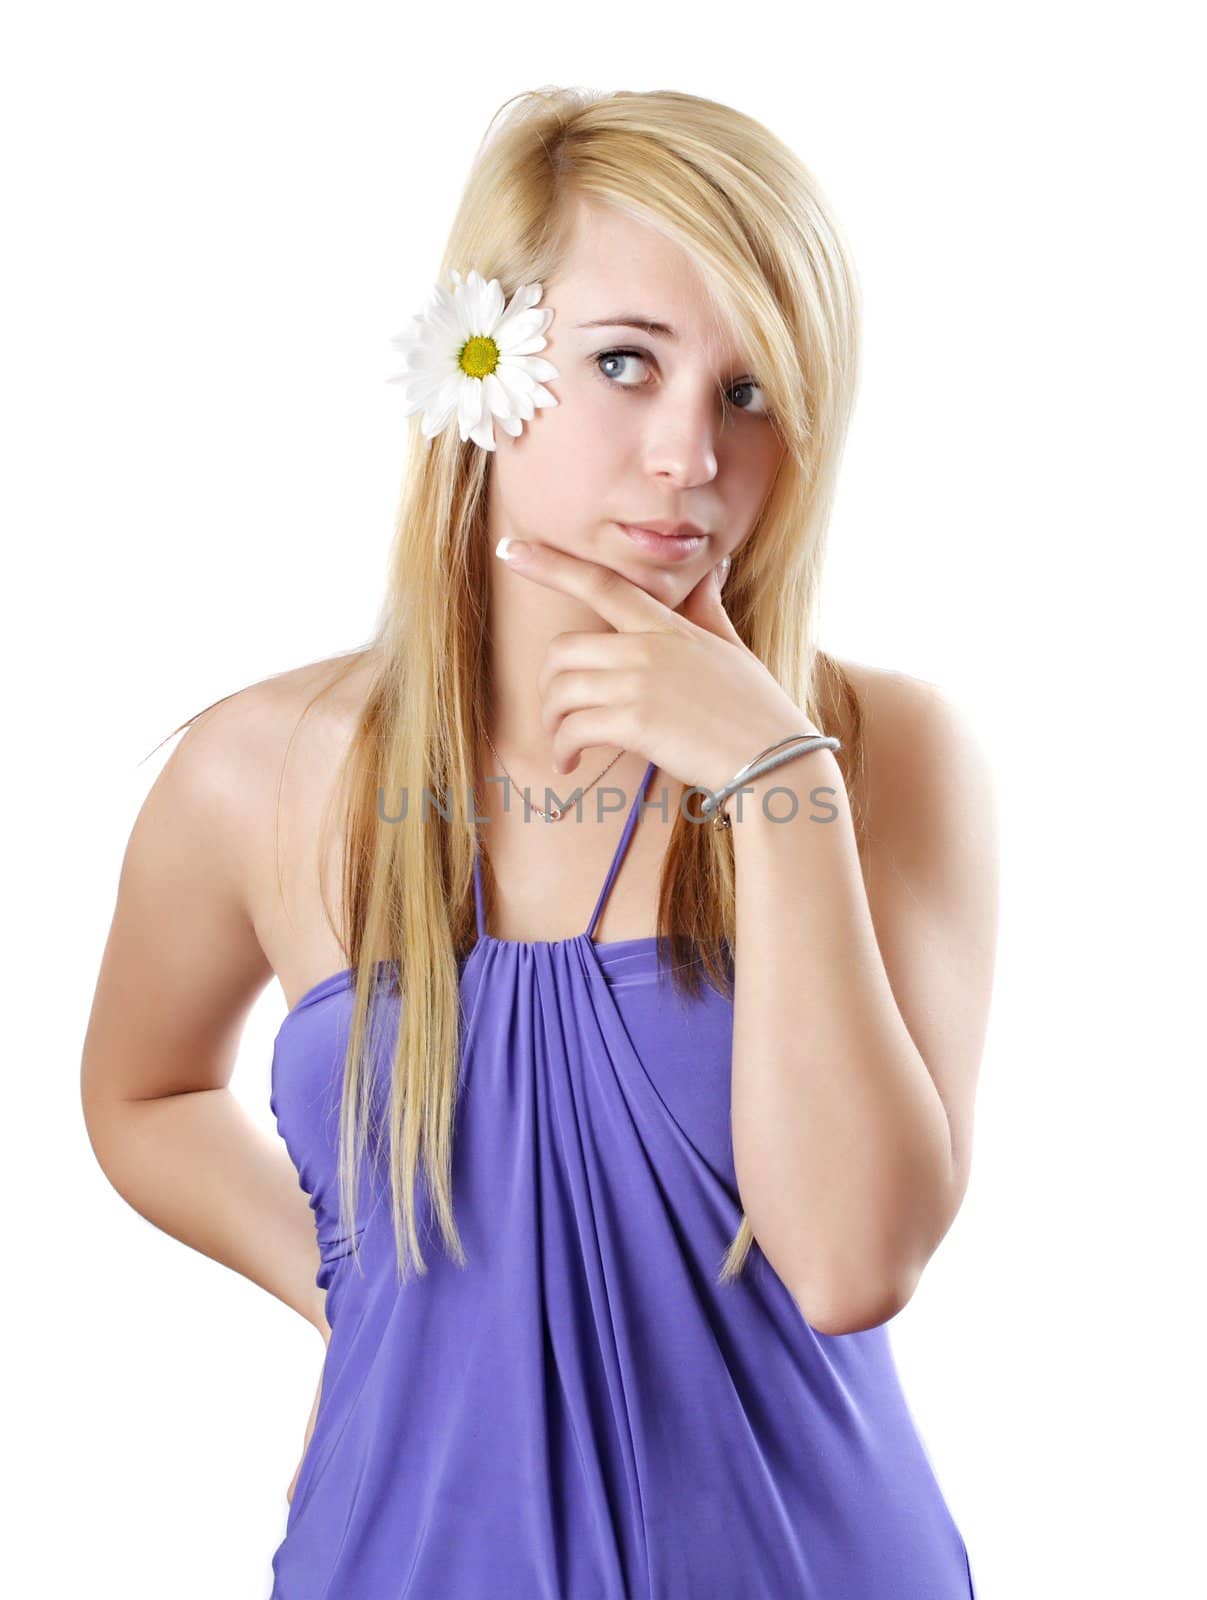 blond teen girl with daisies by lanalanglois